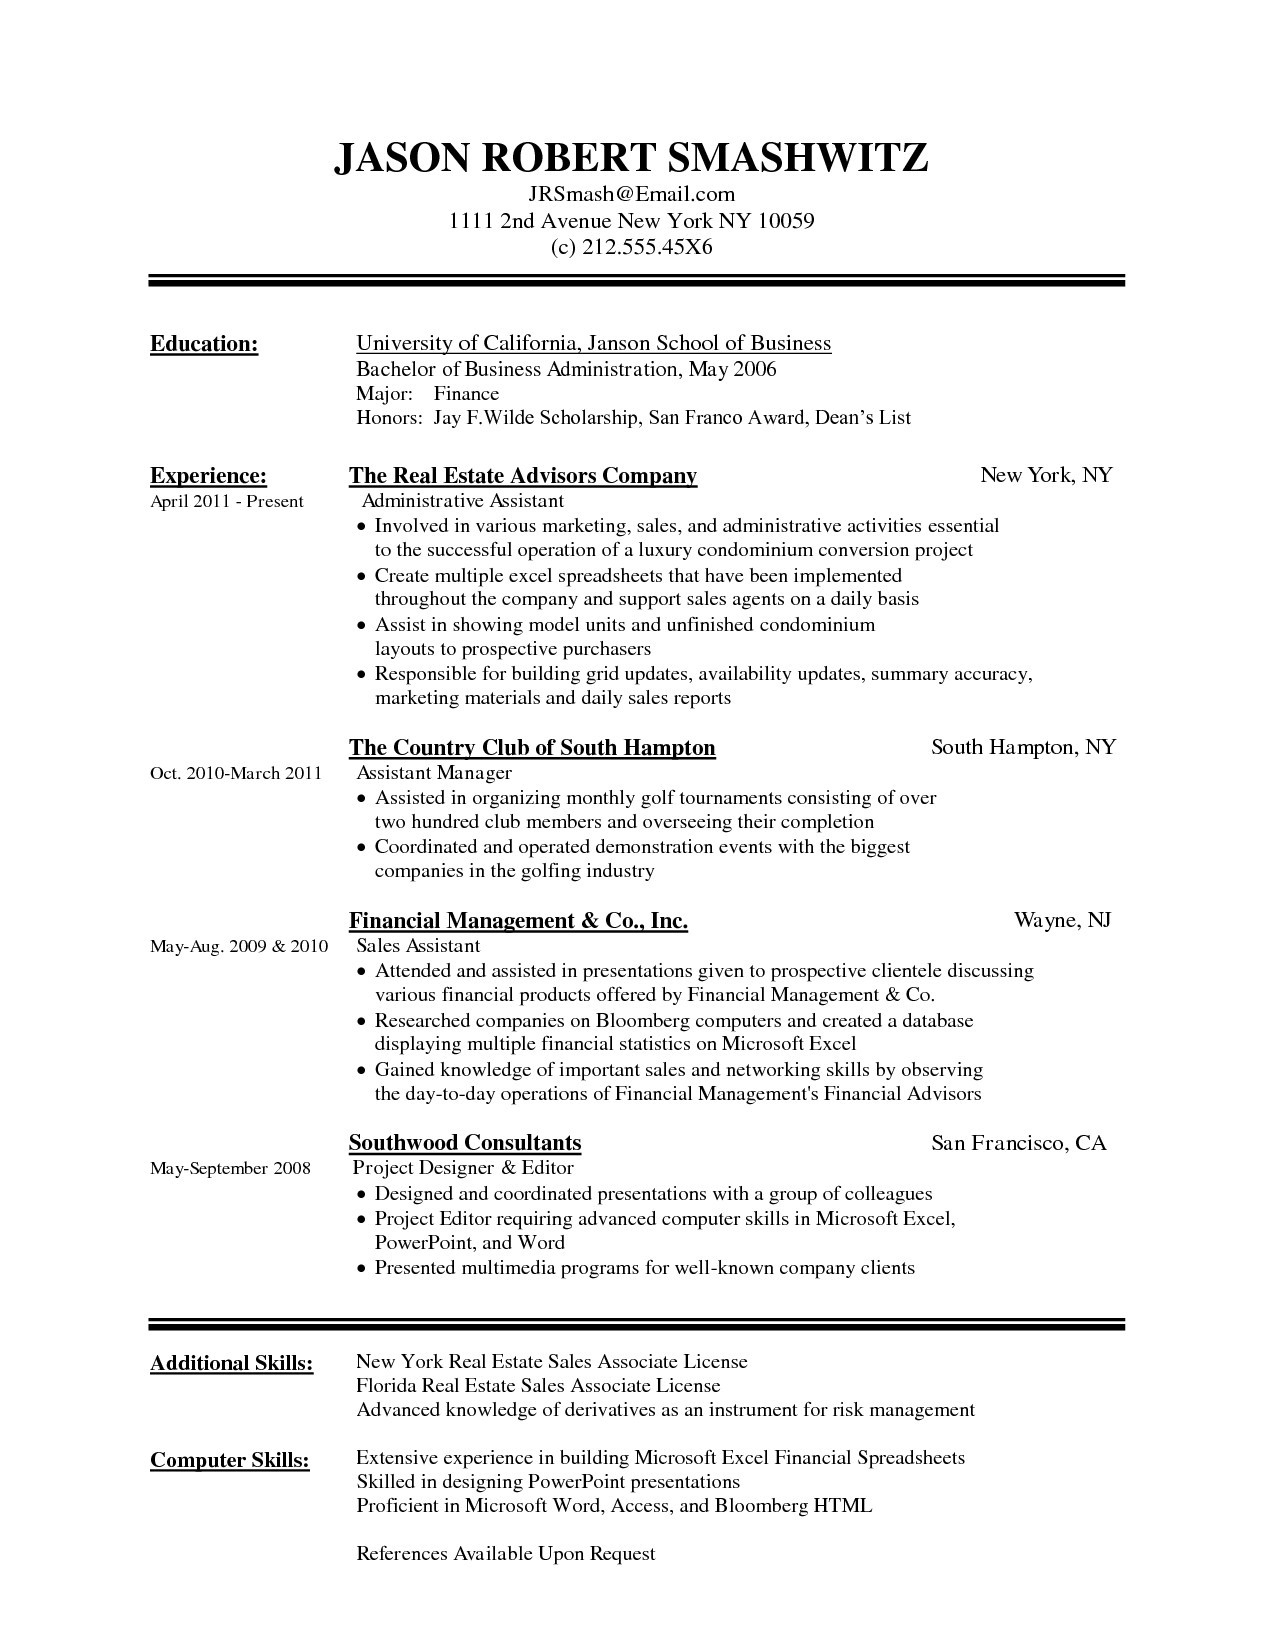 Awesome Resume Templates For Word 2010 – Superkepo Pertaining To Resume Templates Word 2010